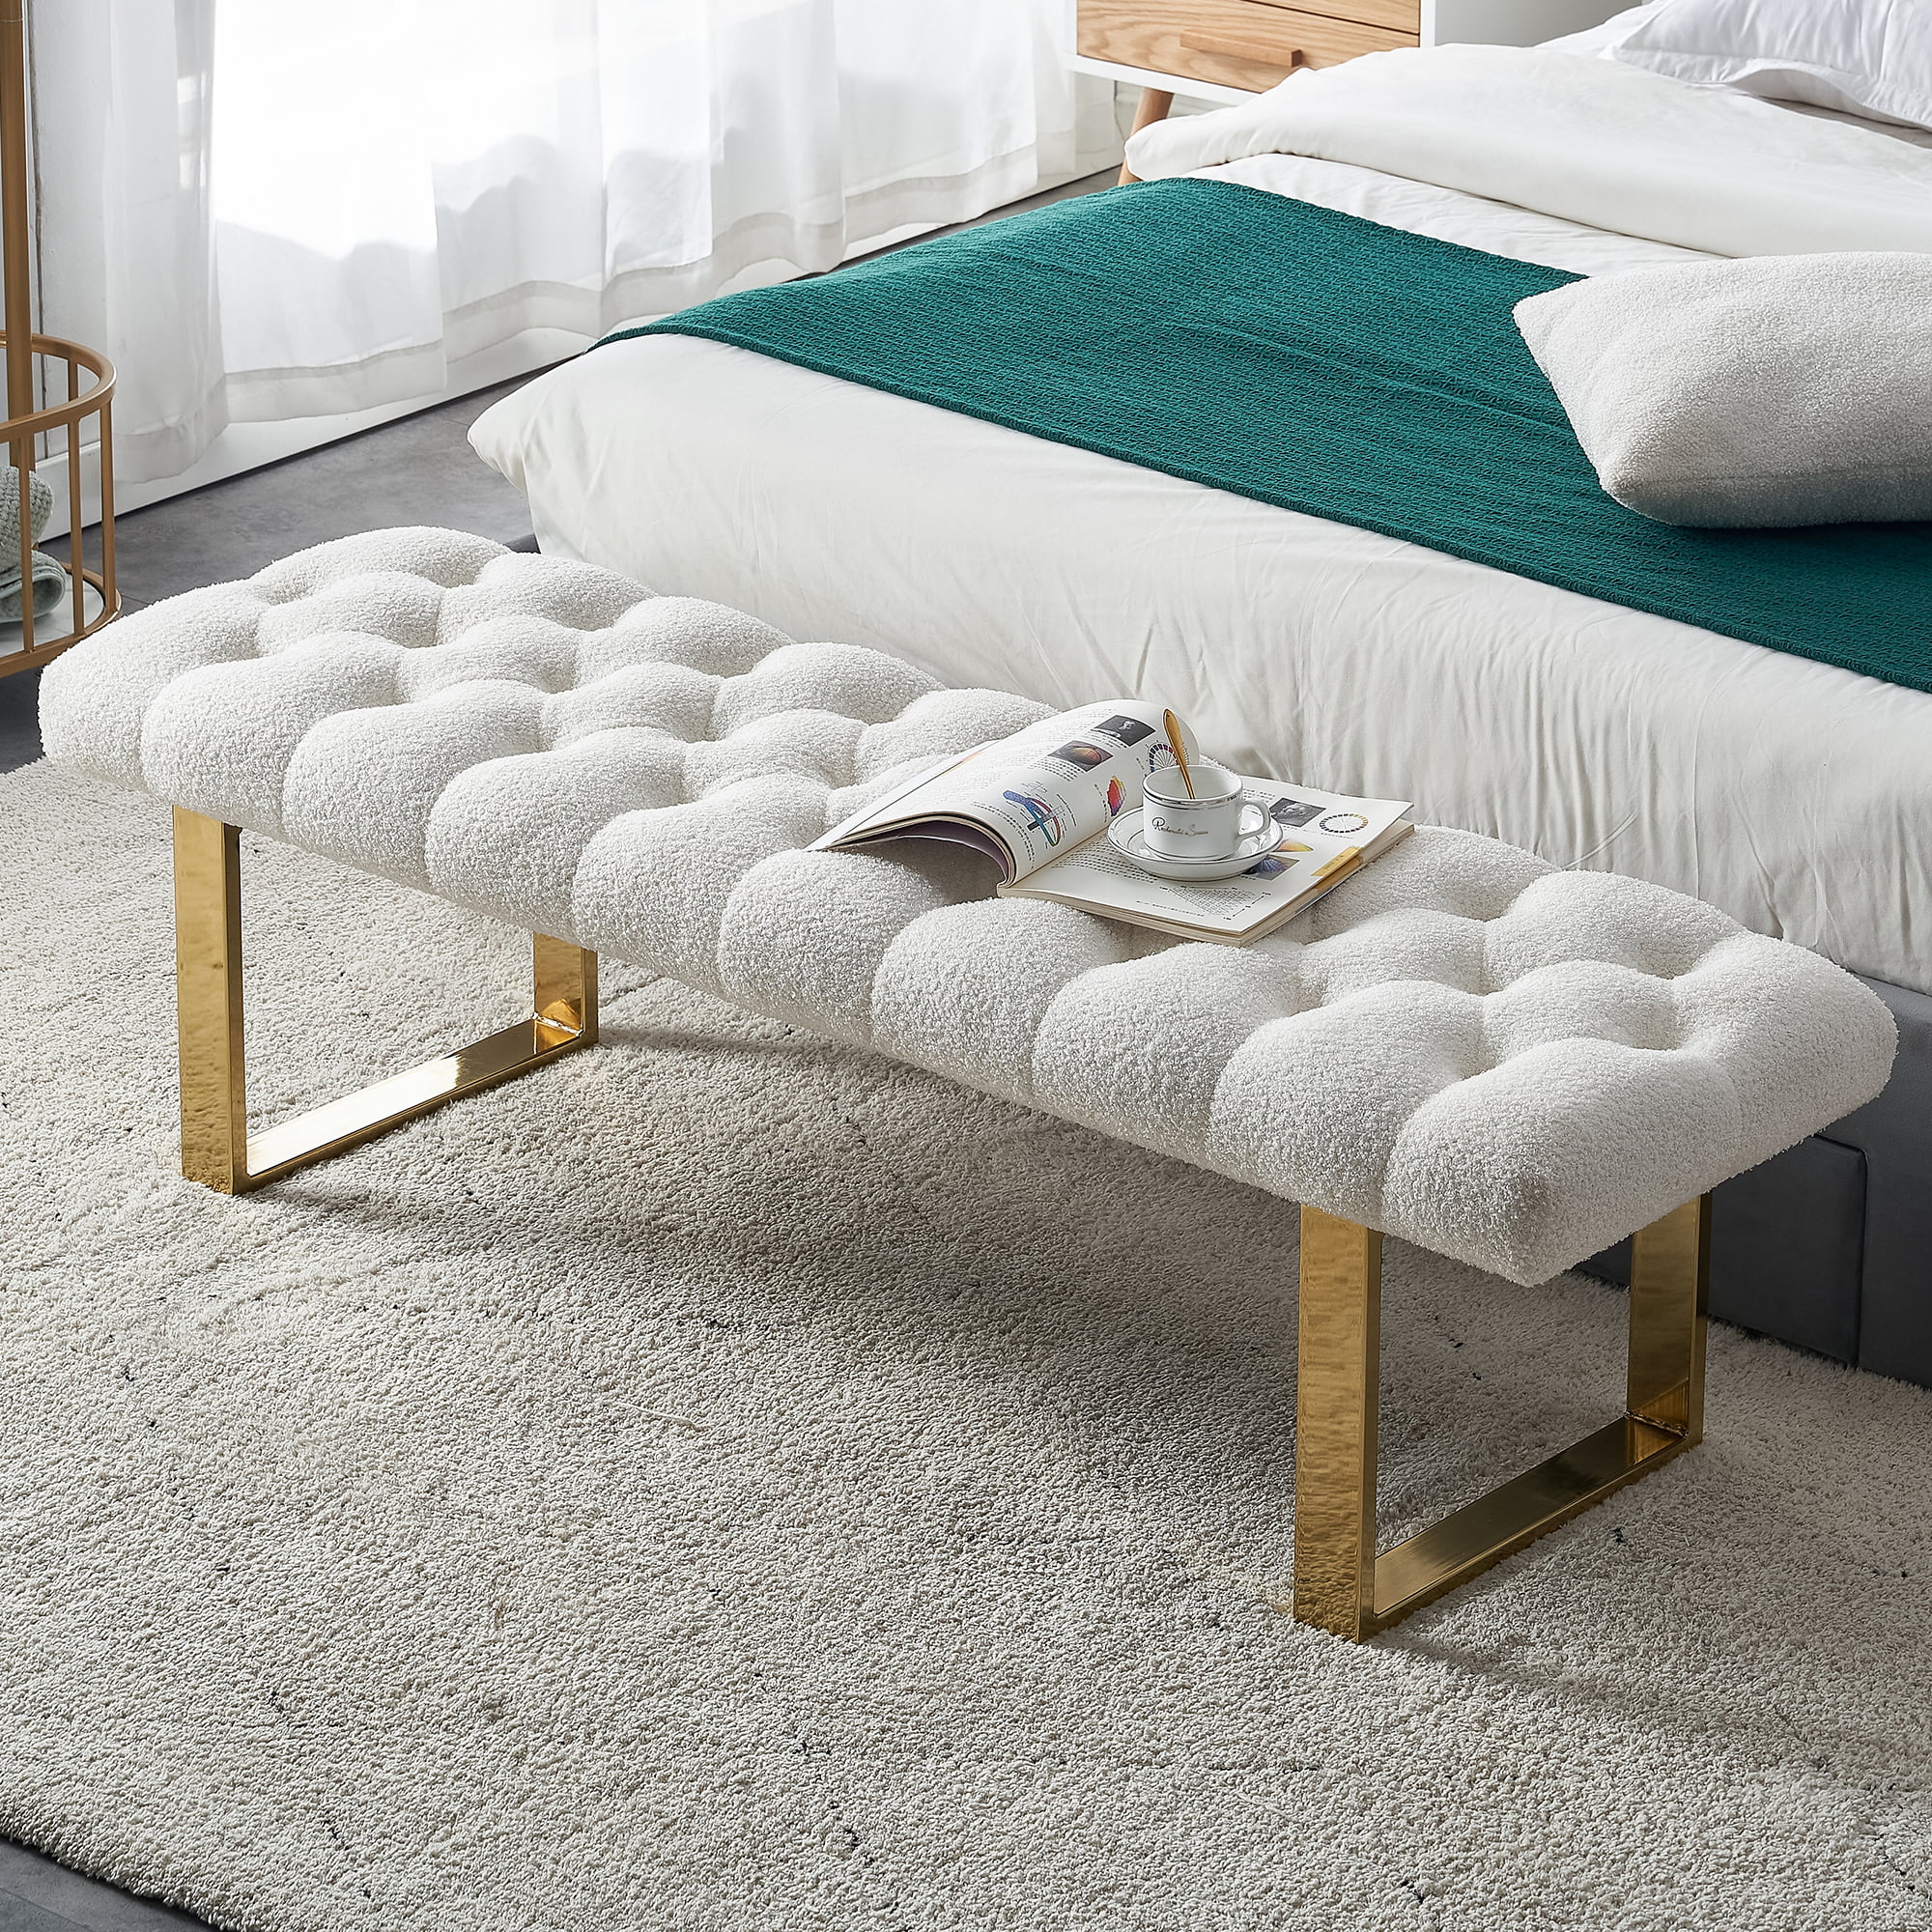 Room. Room, Gold White to Chair Sofa Fitting Bedroom Store, Bench Living .for Bench Bench LANTRO and Velvet Dining Metal Legs JS Changing Upholstered Teddy With .Shoe Room Dining